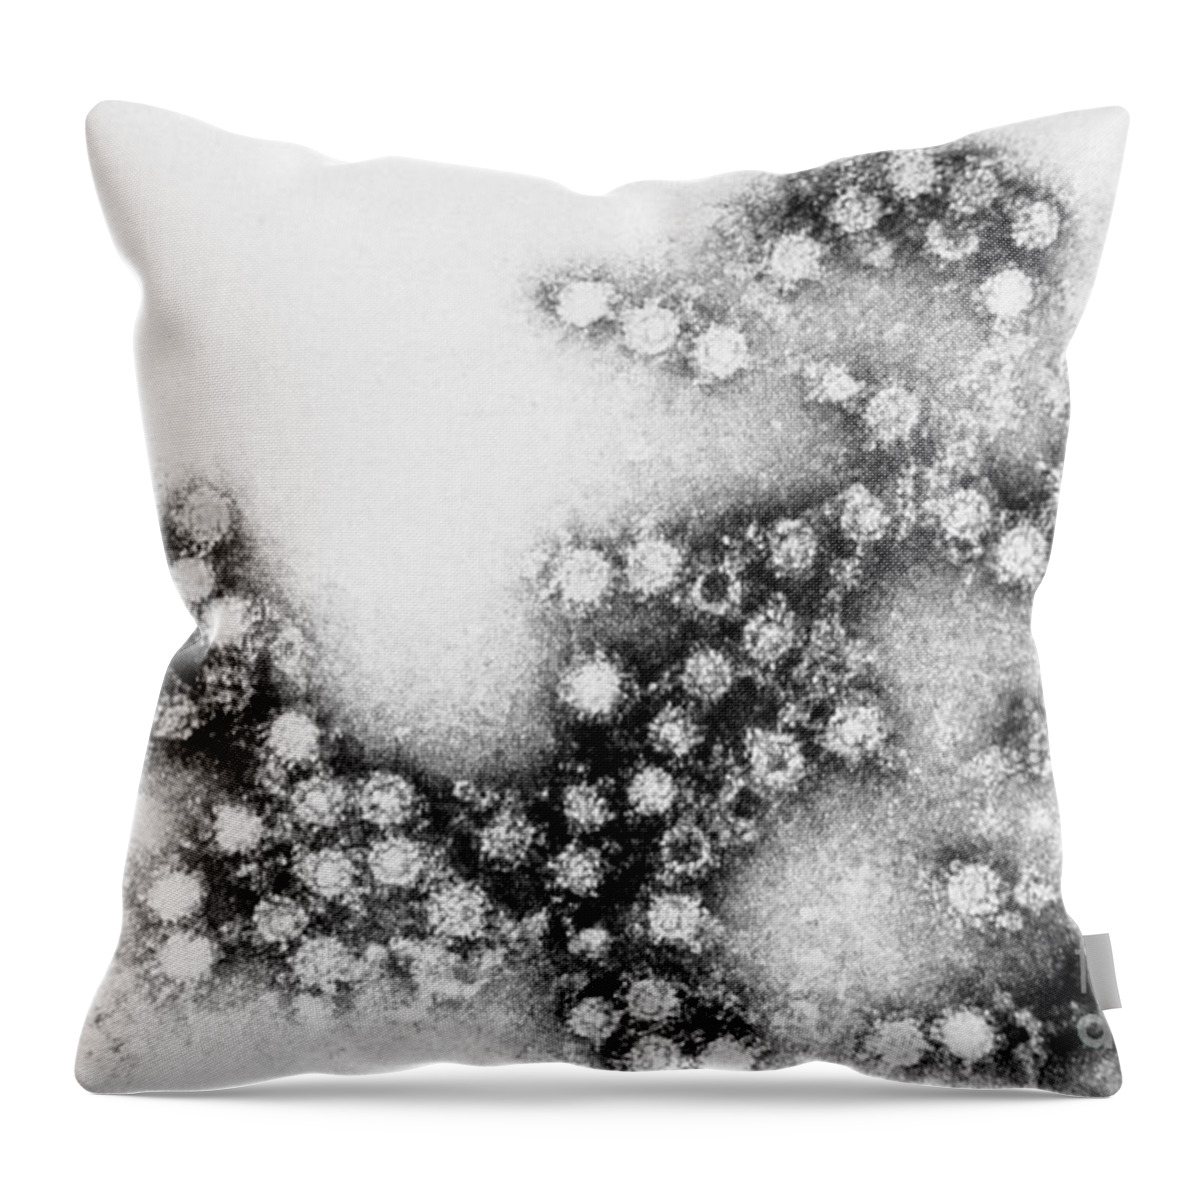 Transmission Electron Micrograph Throw Pillow featuring the Coxsackie B4 Virus, Tem #5 by Science Source